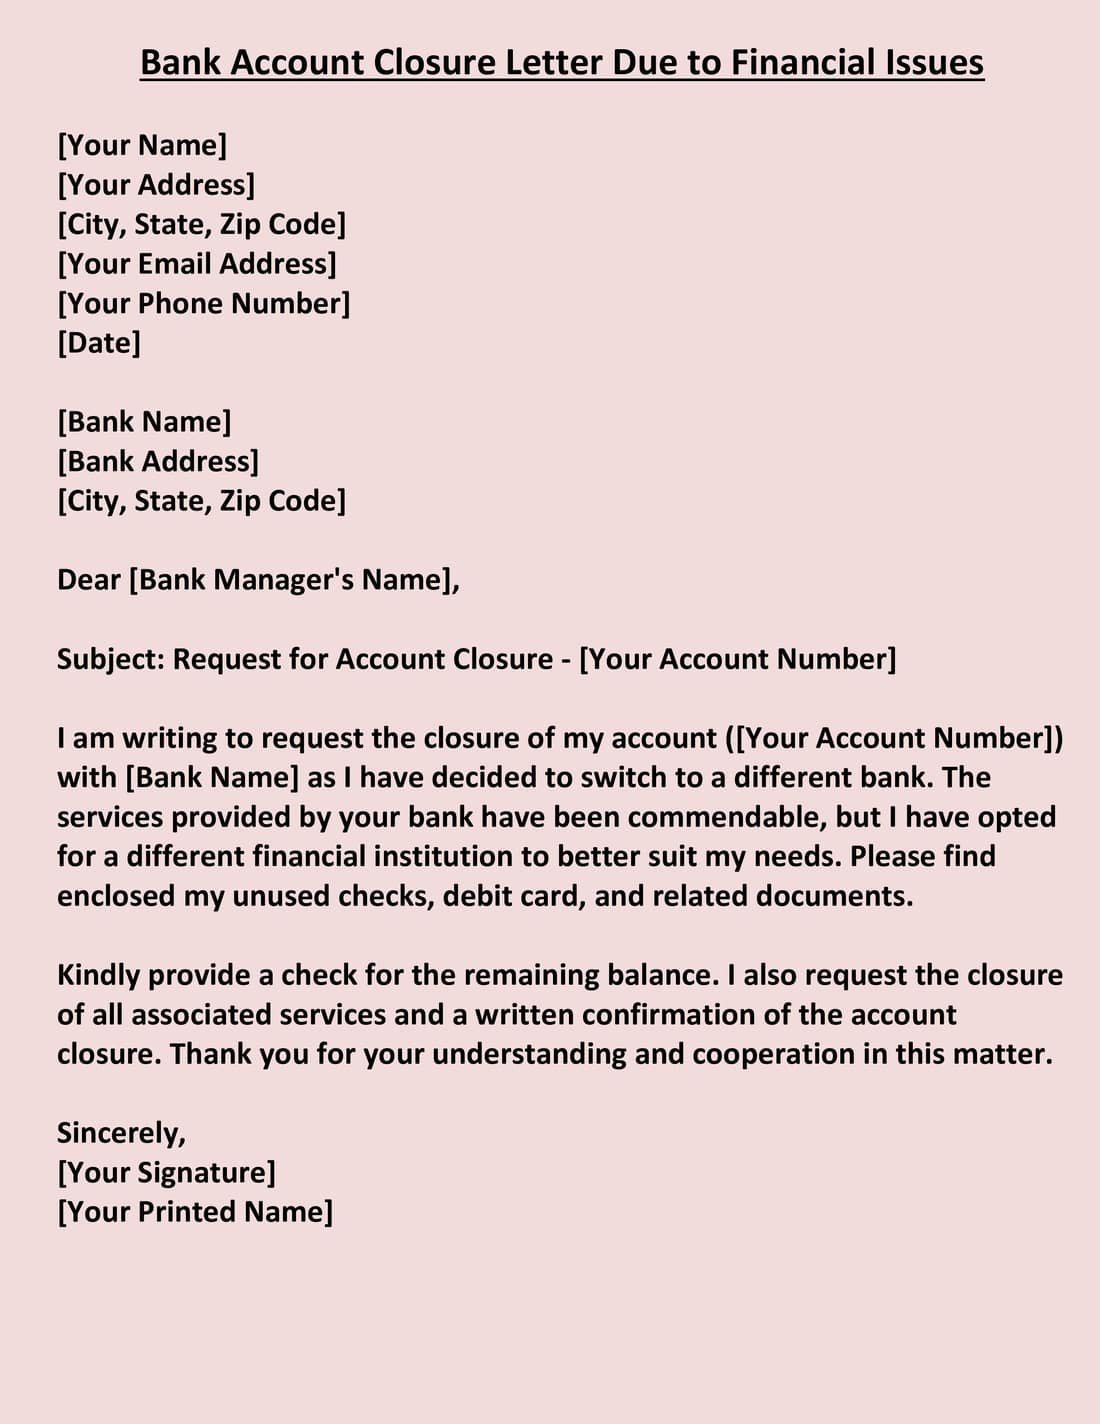 Bank Account Closure Letter Due to Financial Issue